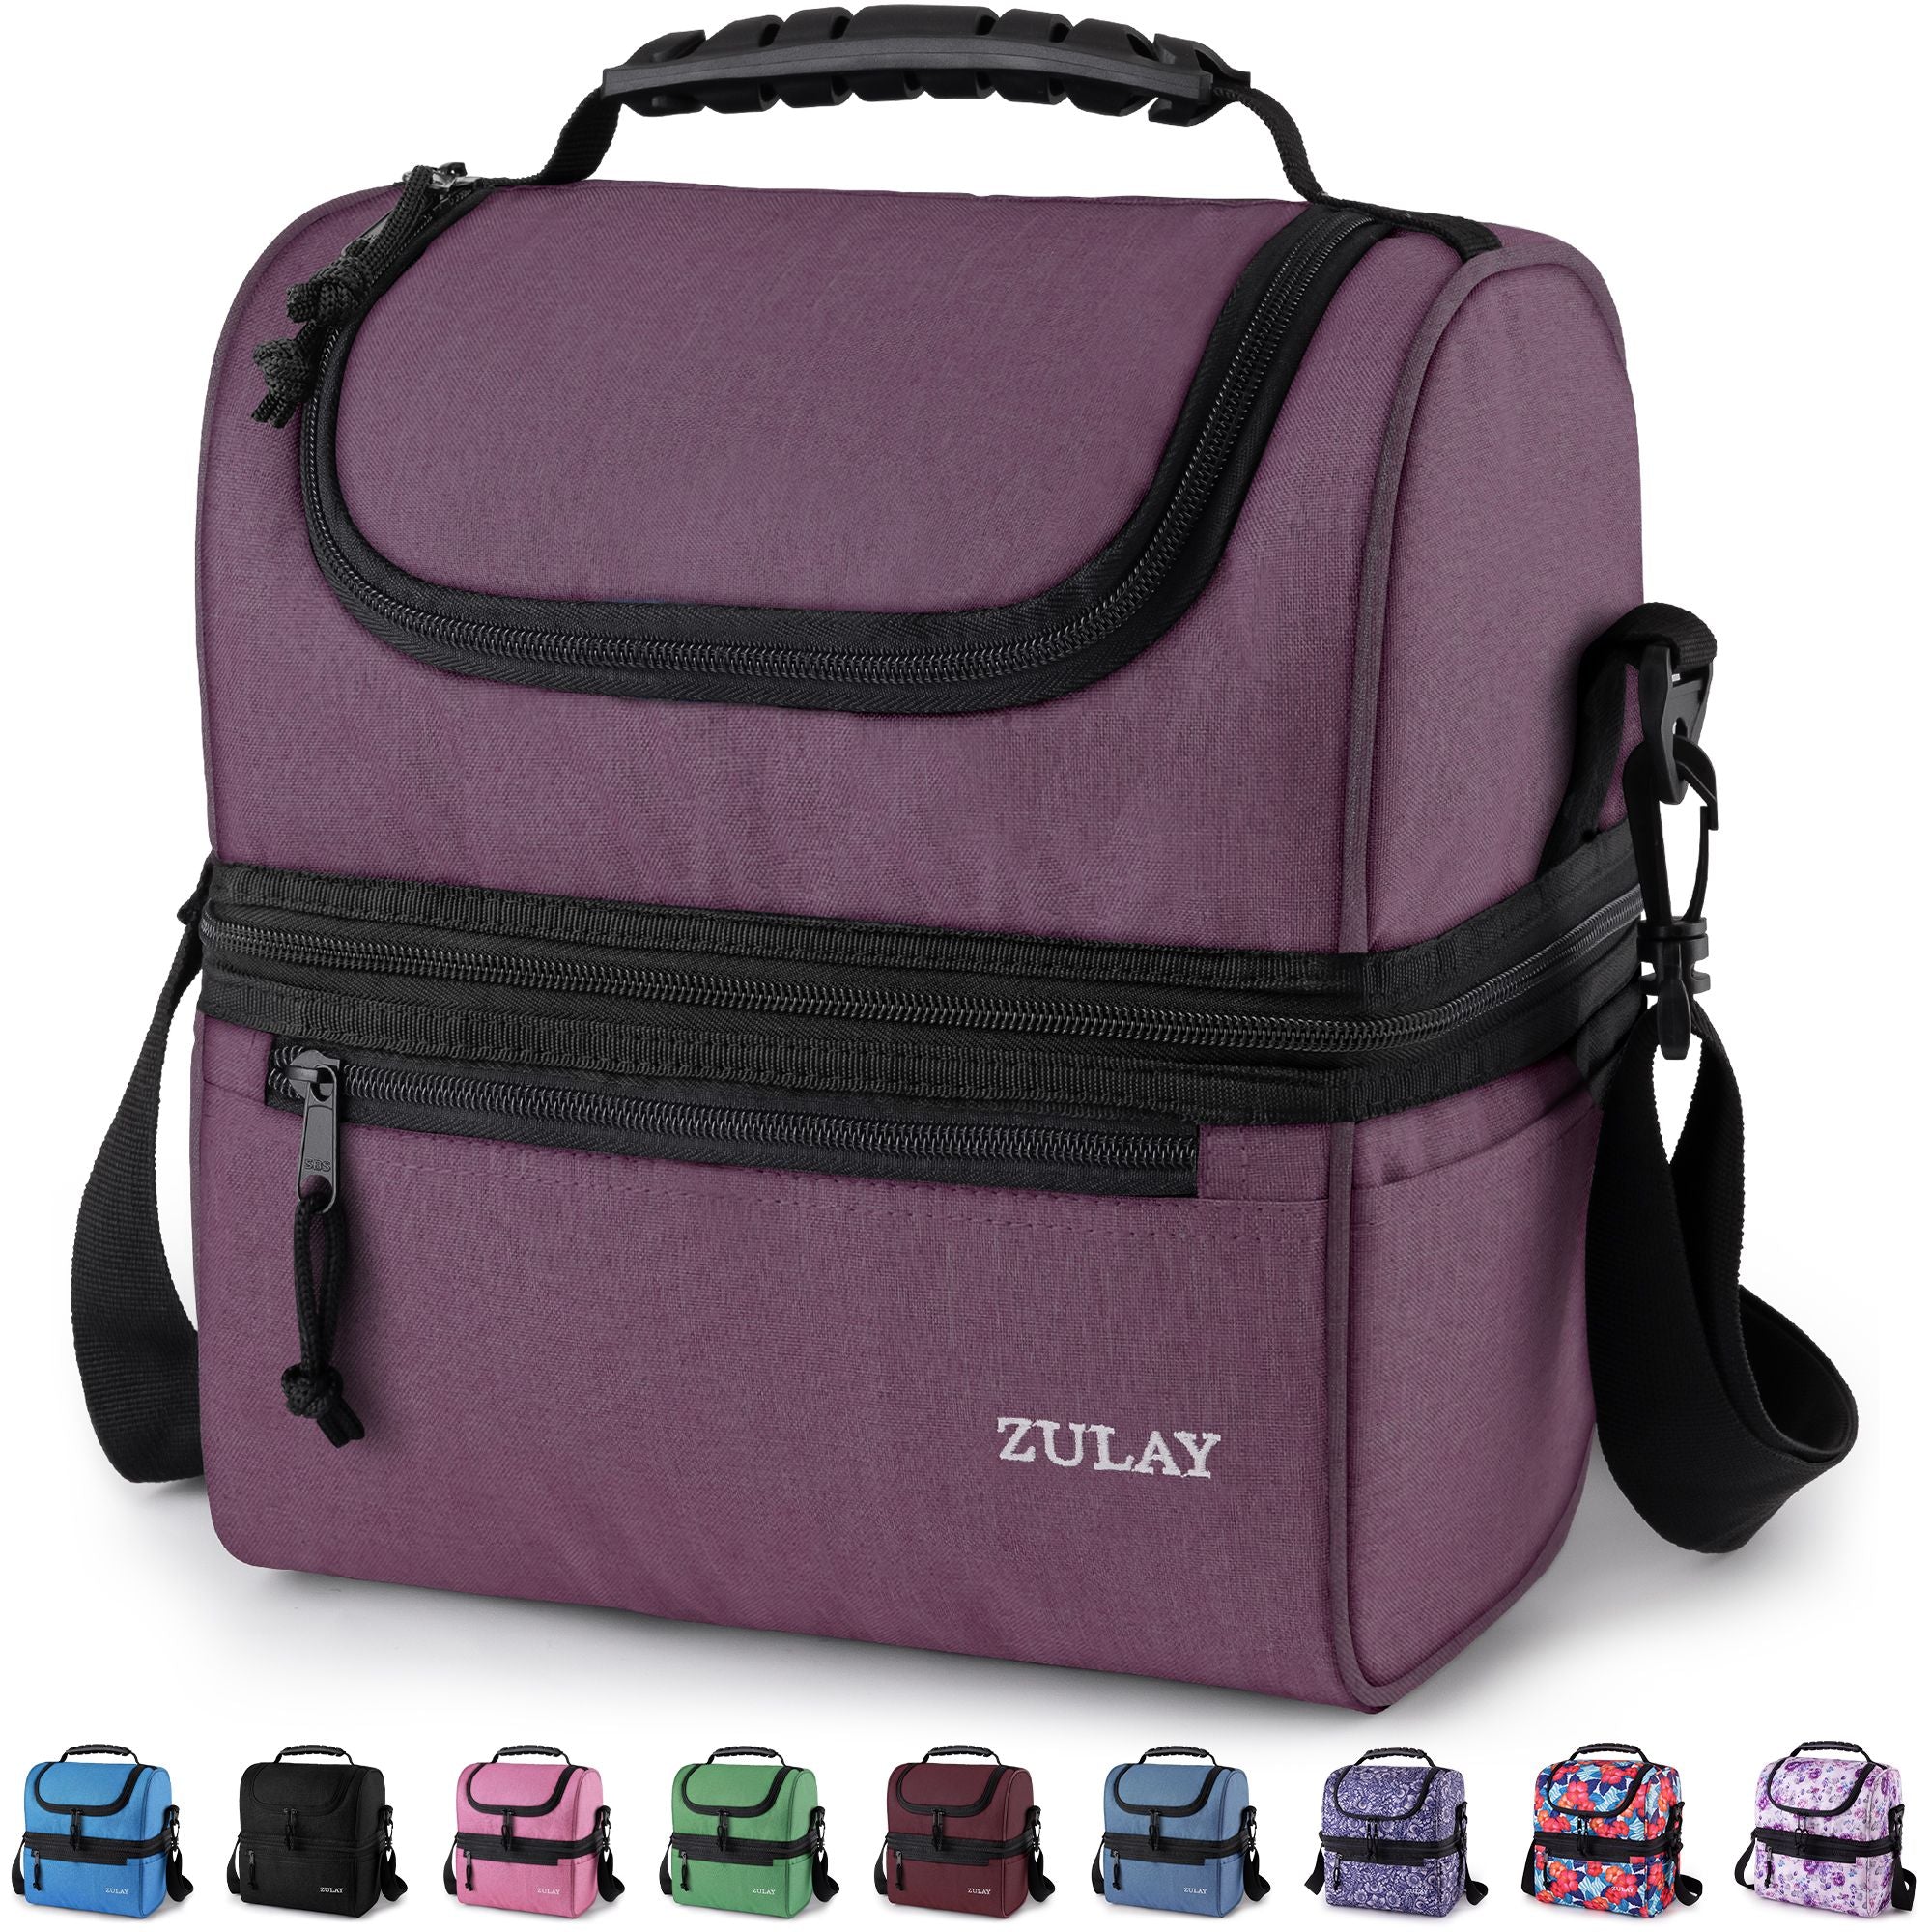 Yosgar Zulay Insulated Lunch Bag - Thermal Kids Lunch Bag with Spacious Compartment & Built-in Handle - Portable Back to School Lunch Bag for Kids, Bo